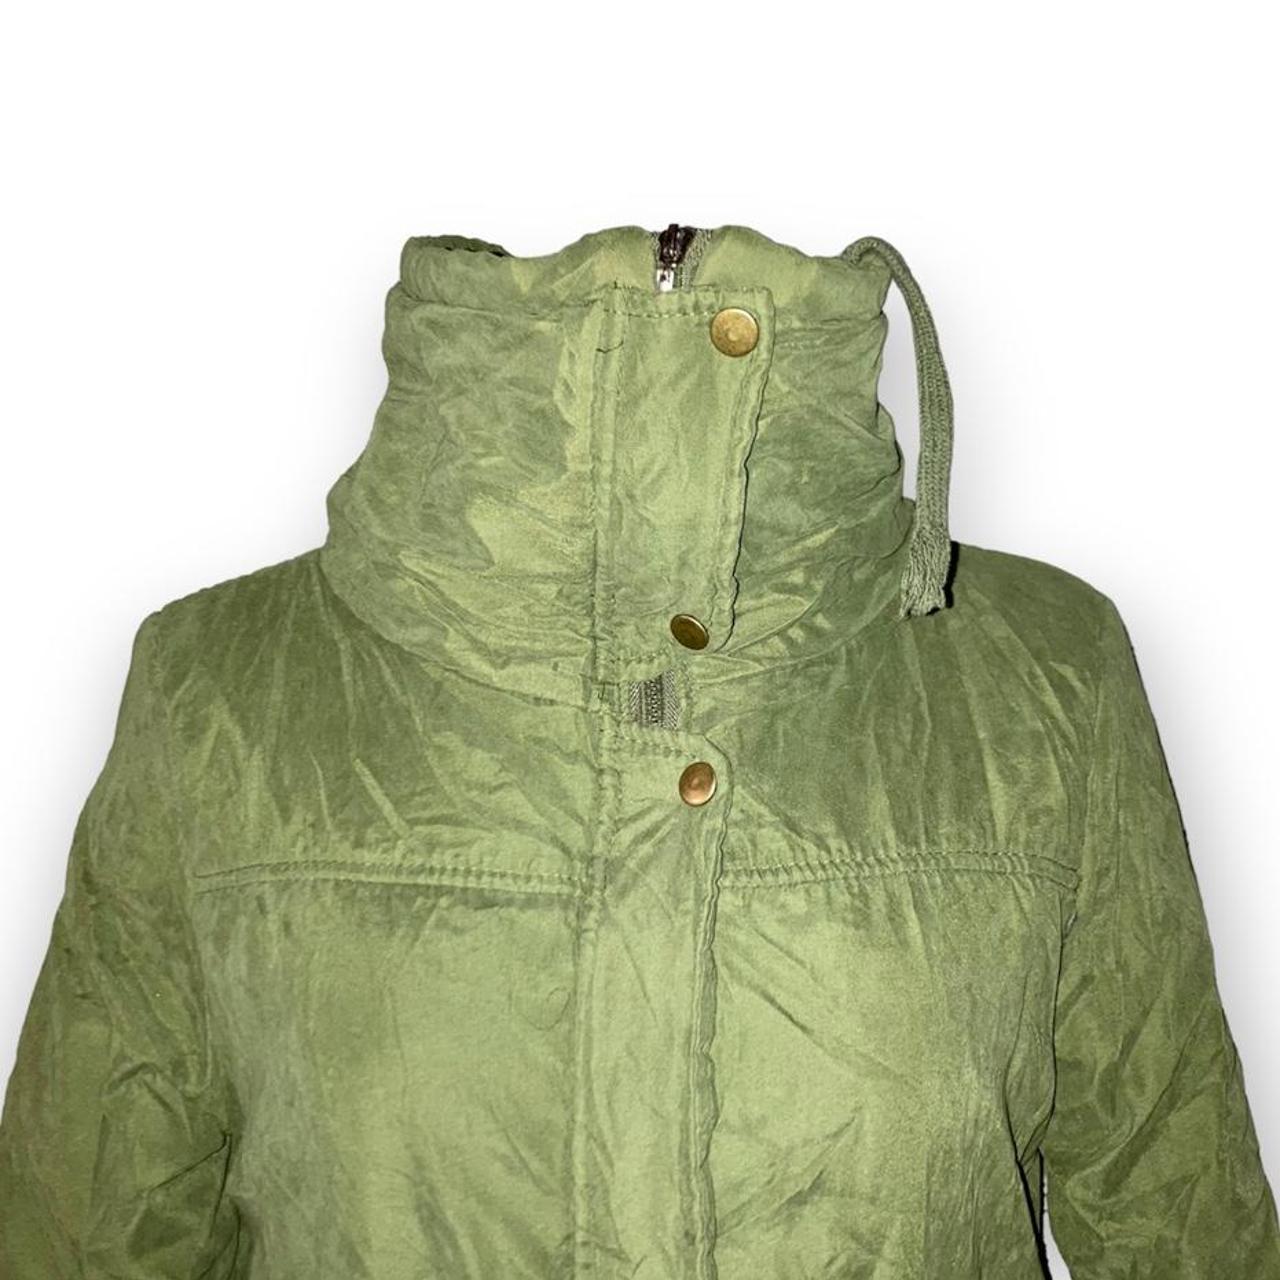 Women's White and Green Jacket (2)